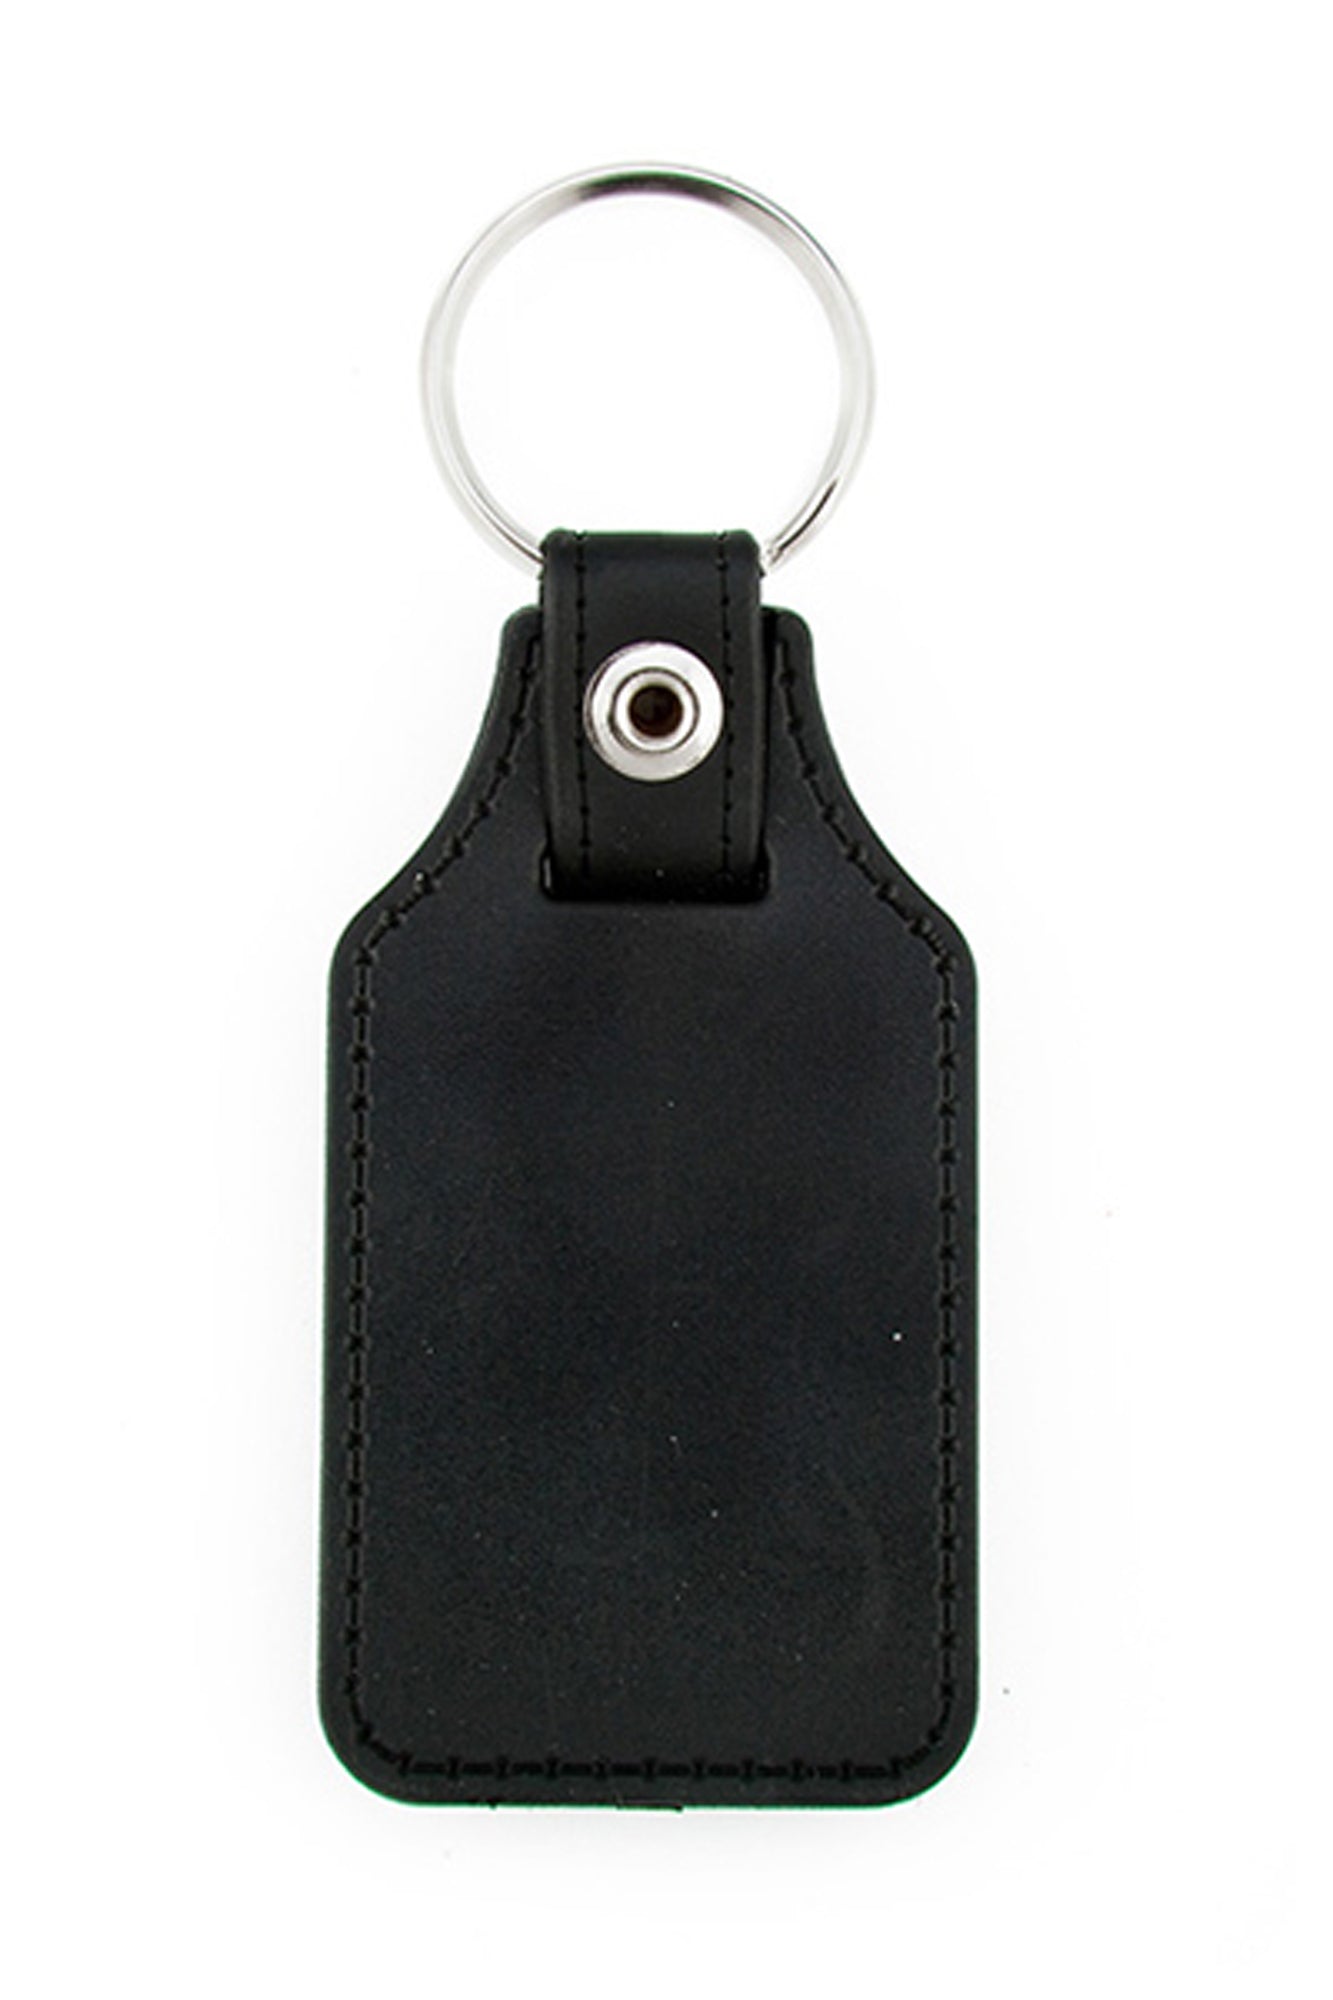 Route 66 Key Ring featuring the state name of your choice